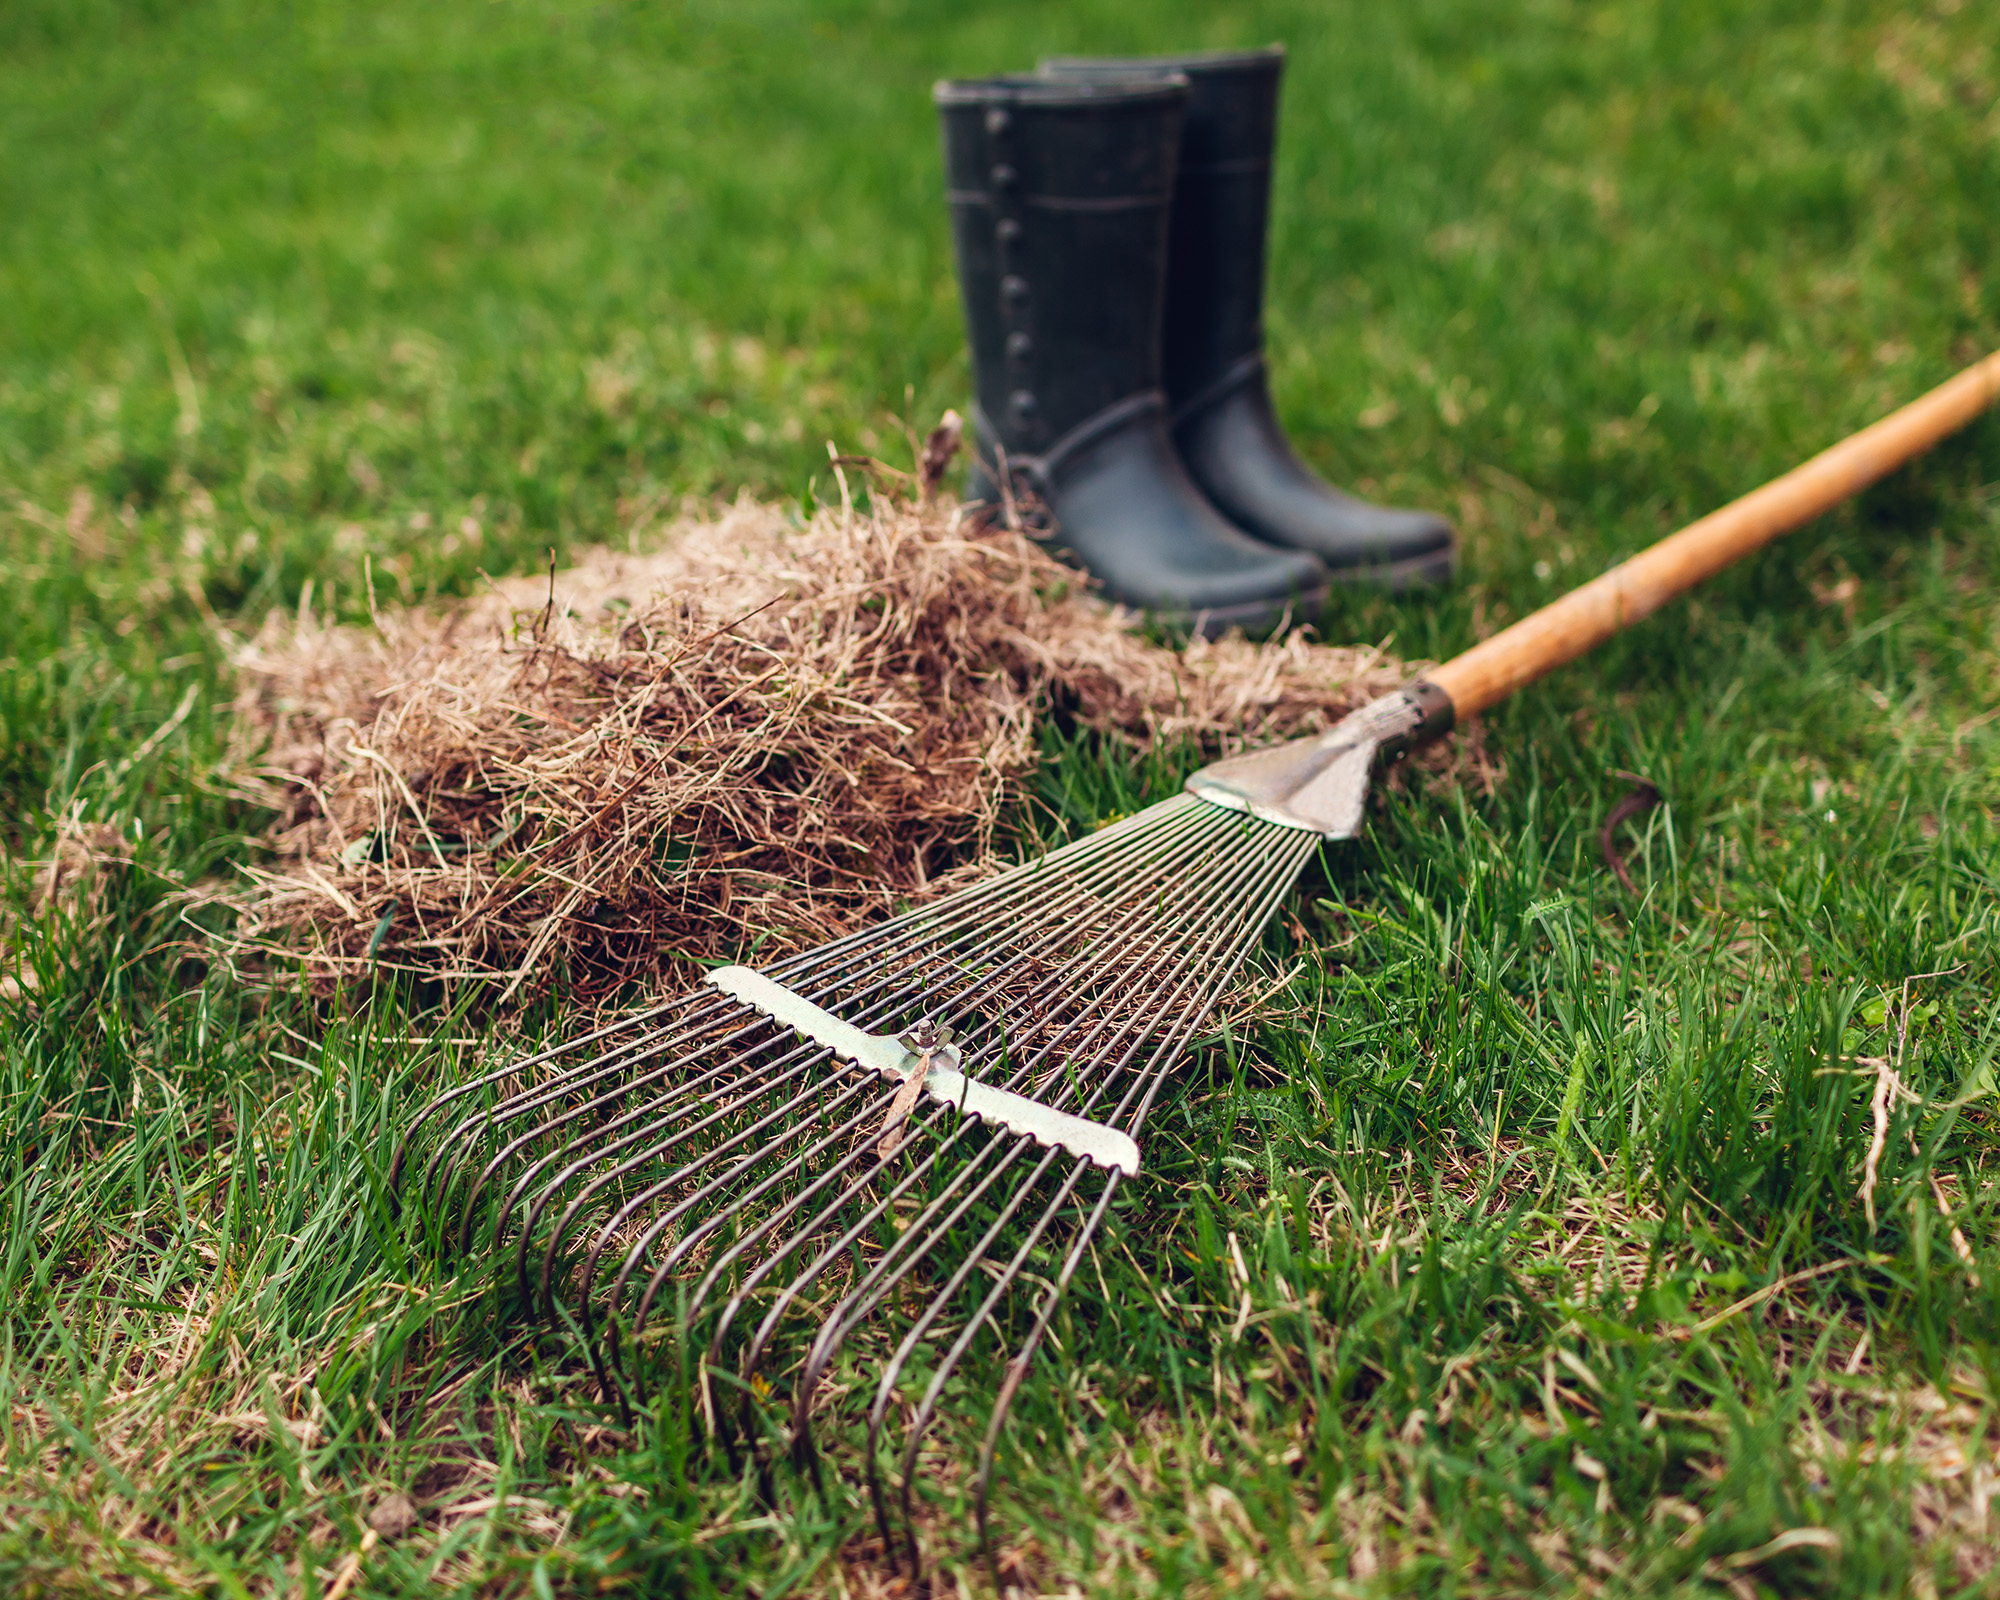 Rake and boots on lawn with pile of dead matter